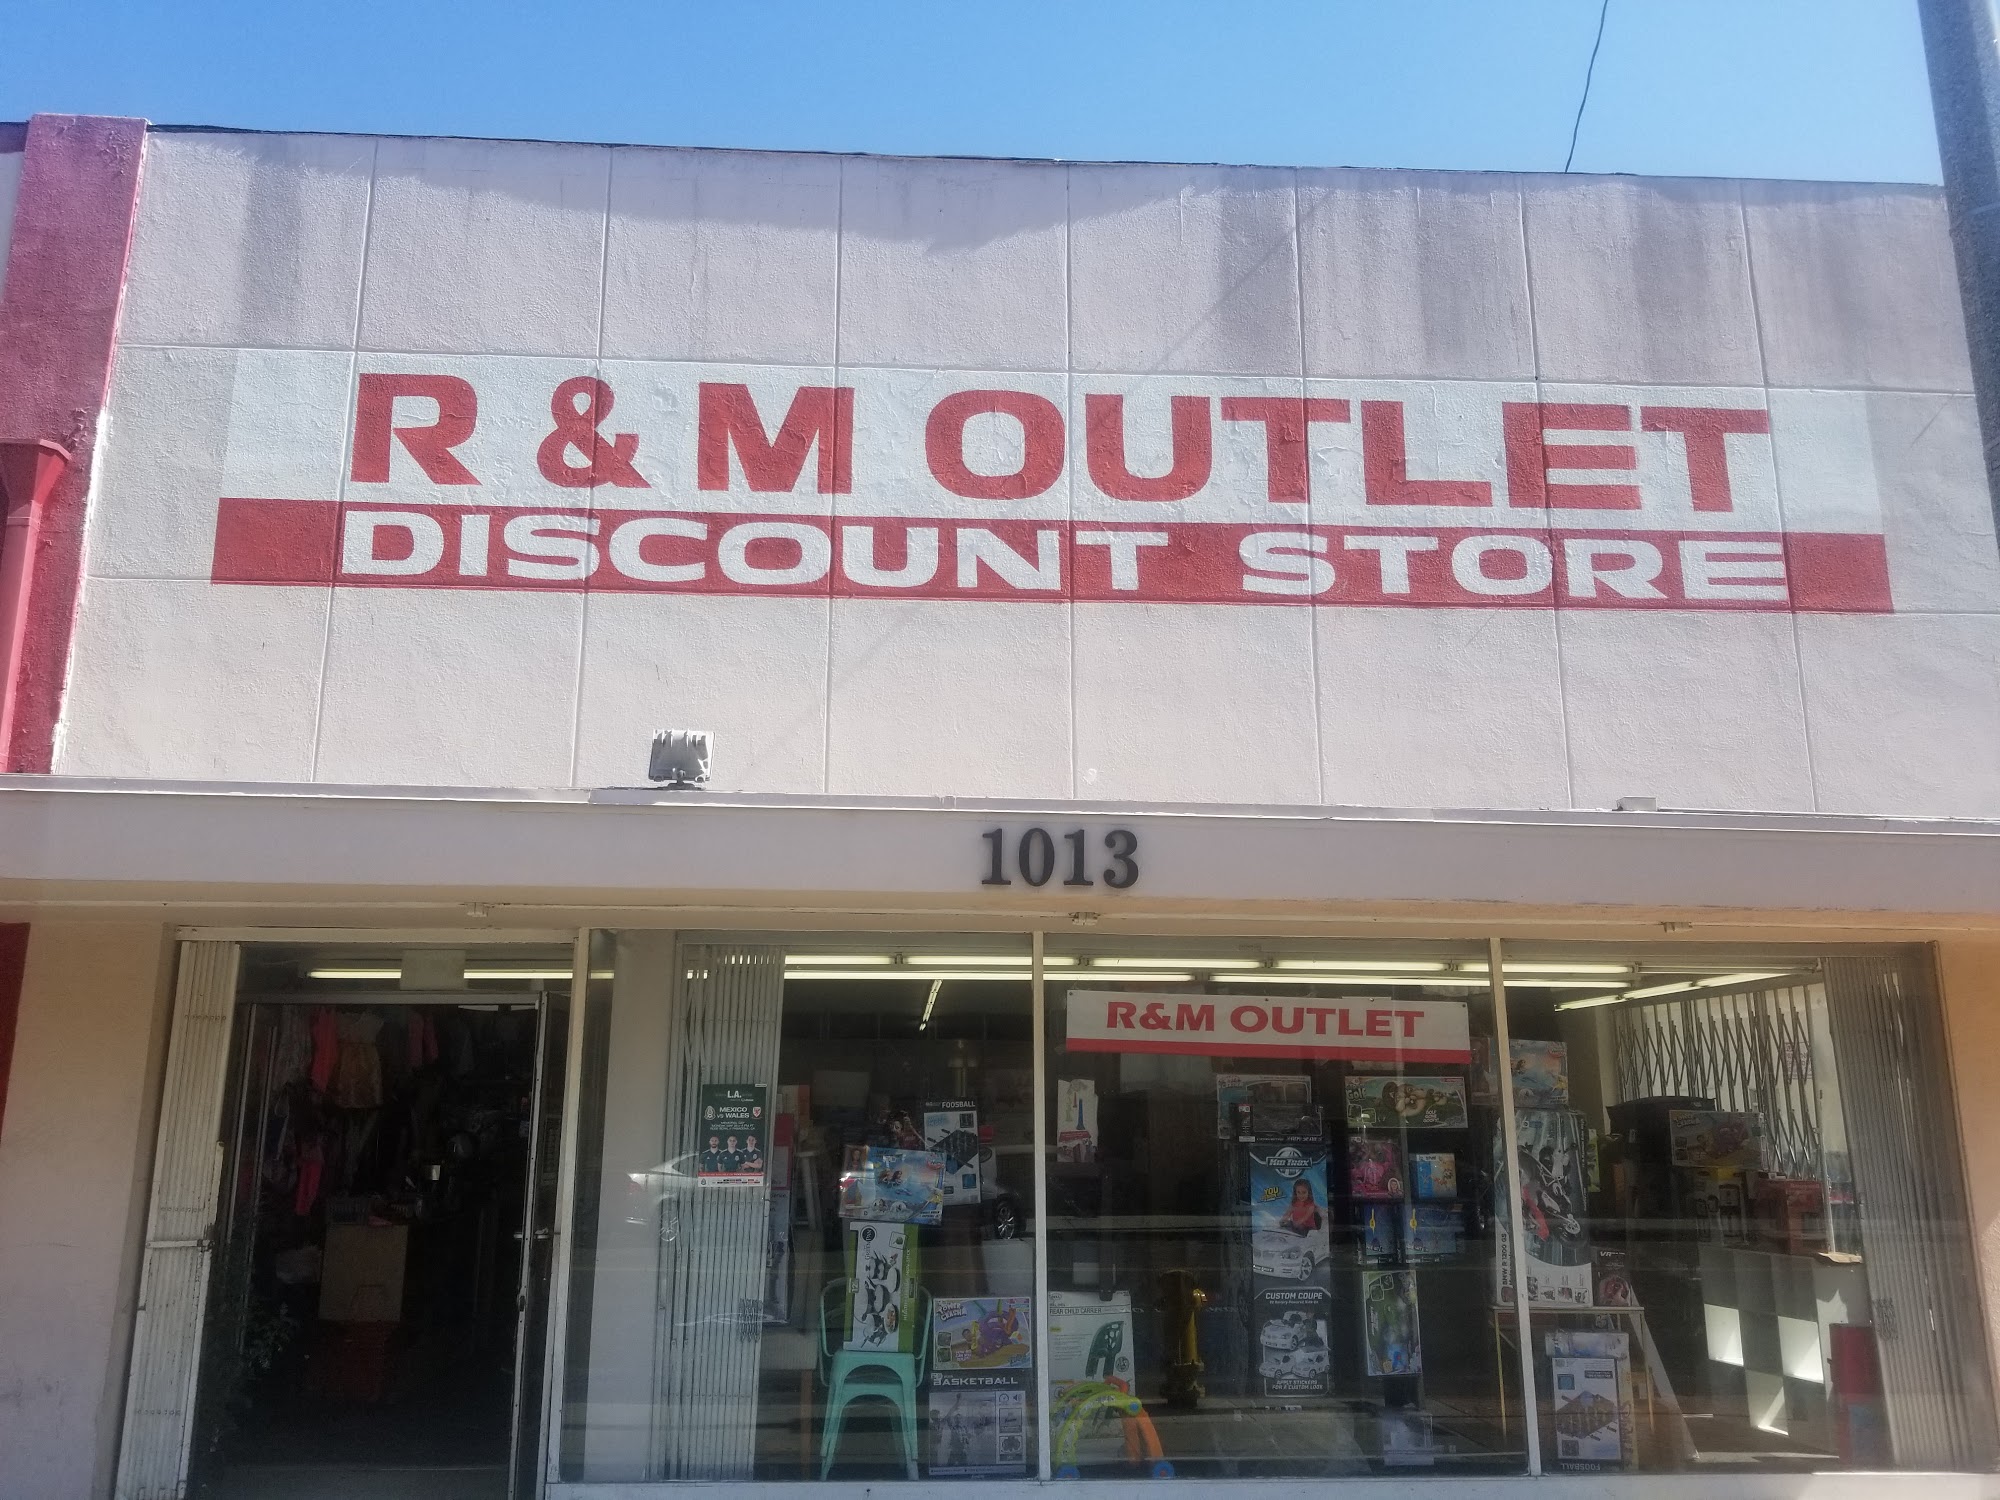 R&M Outlet Discount Store